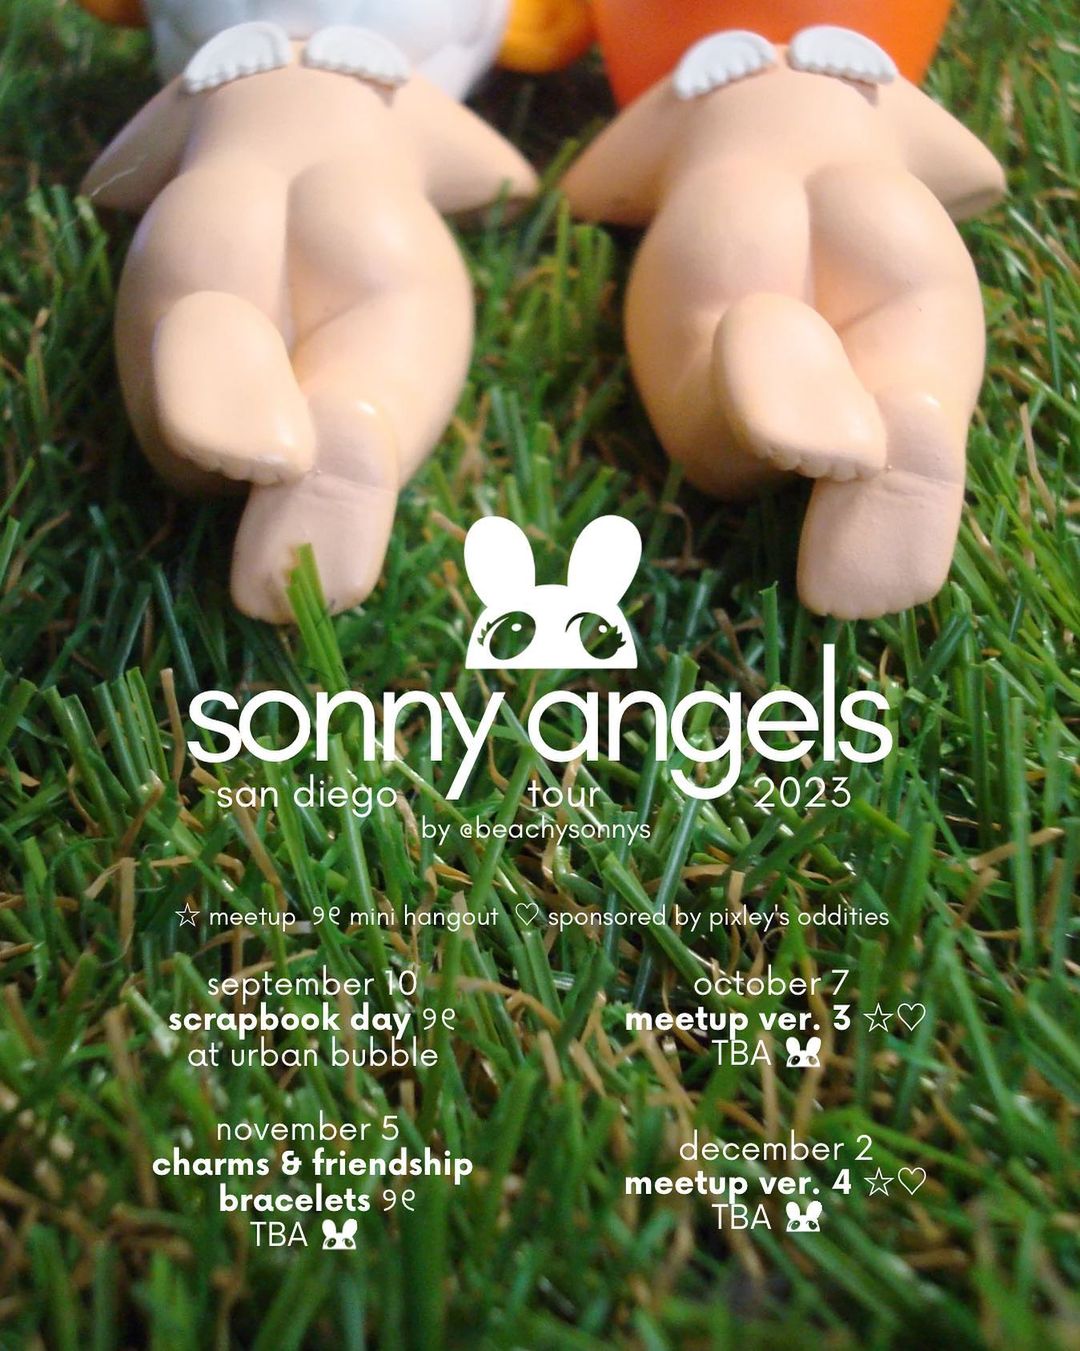 An invitation for Sonny Angels Meetups in San Diego